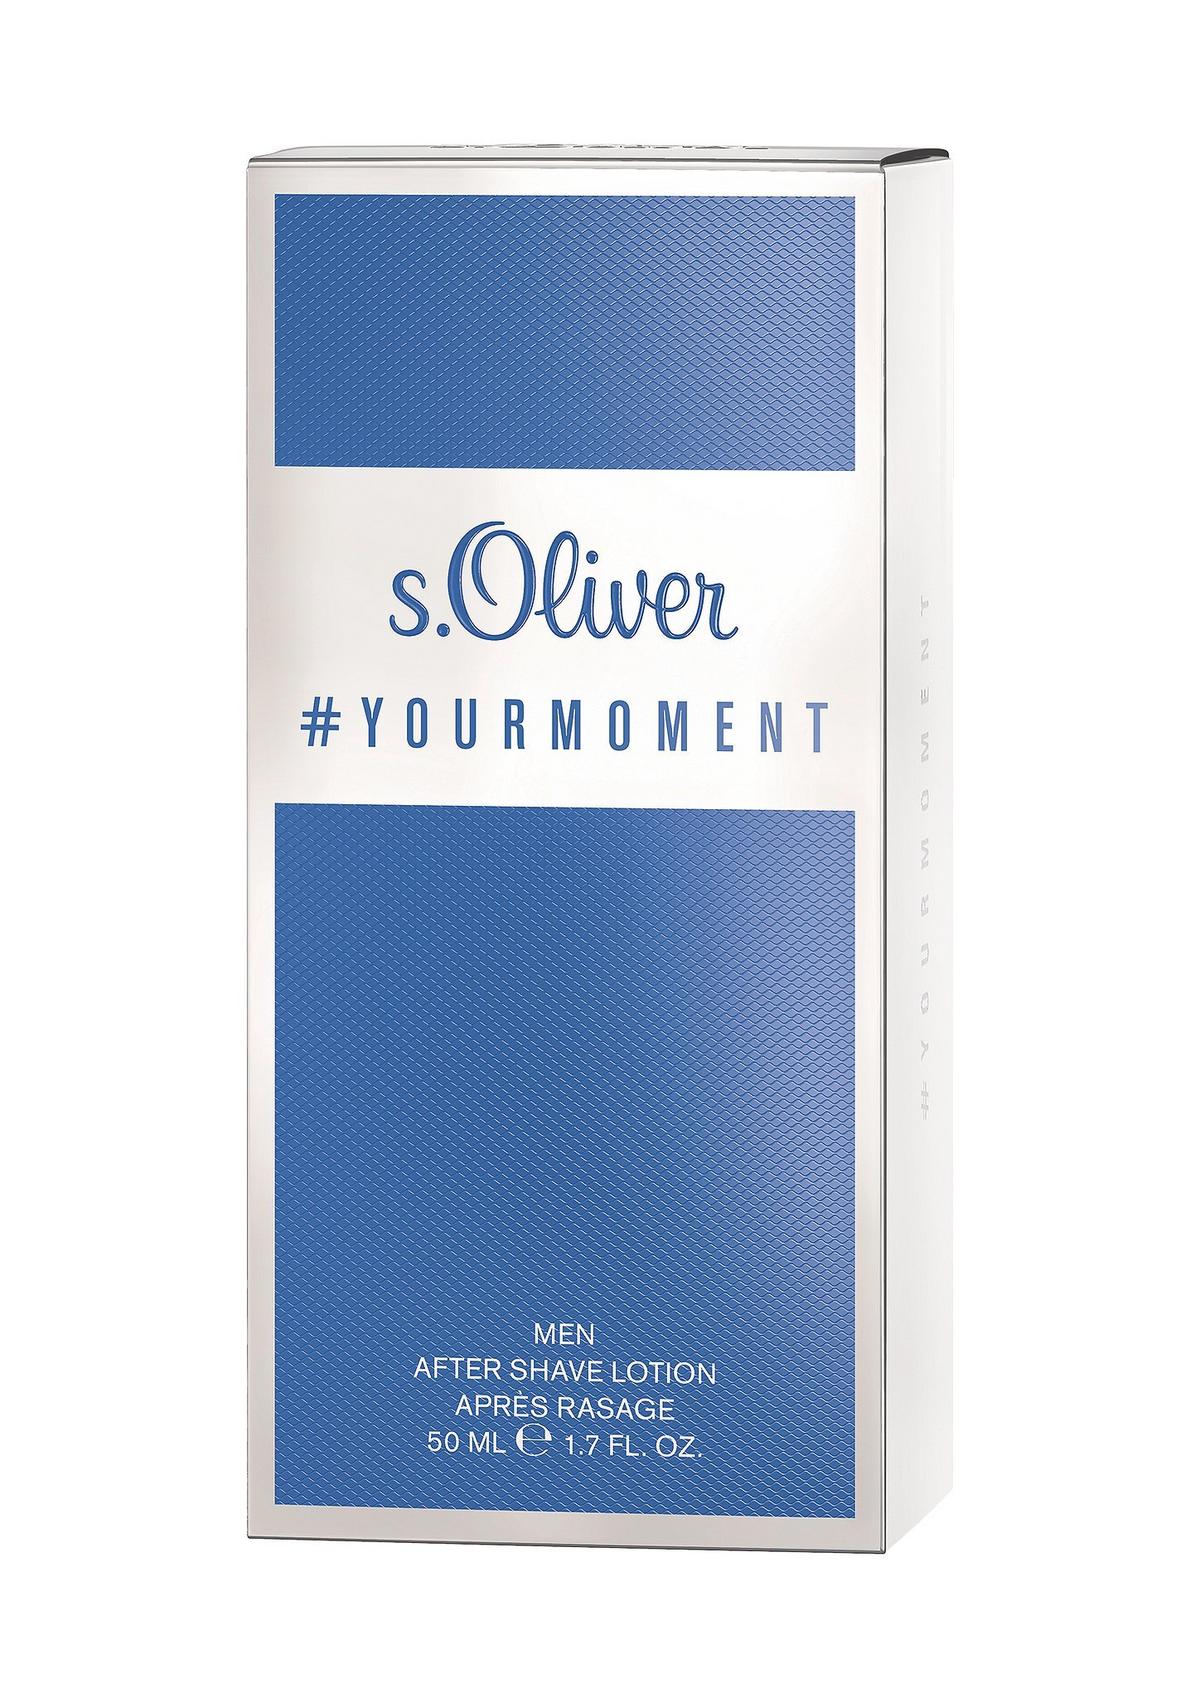 s.Oliver #YOUR MOMENT After Shave Lotion 50 ml